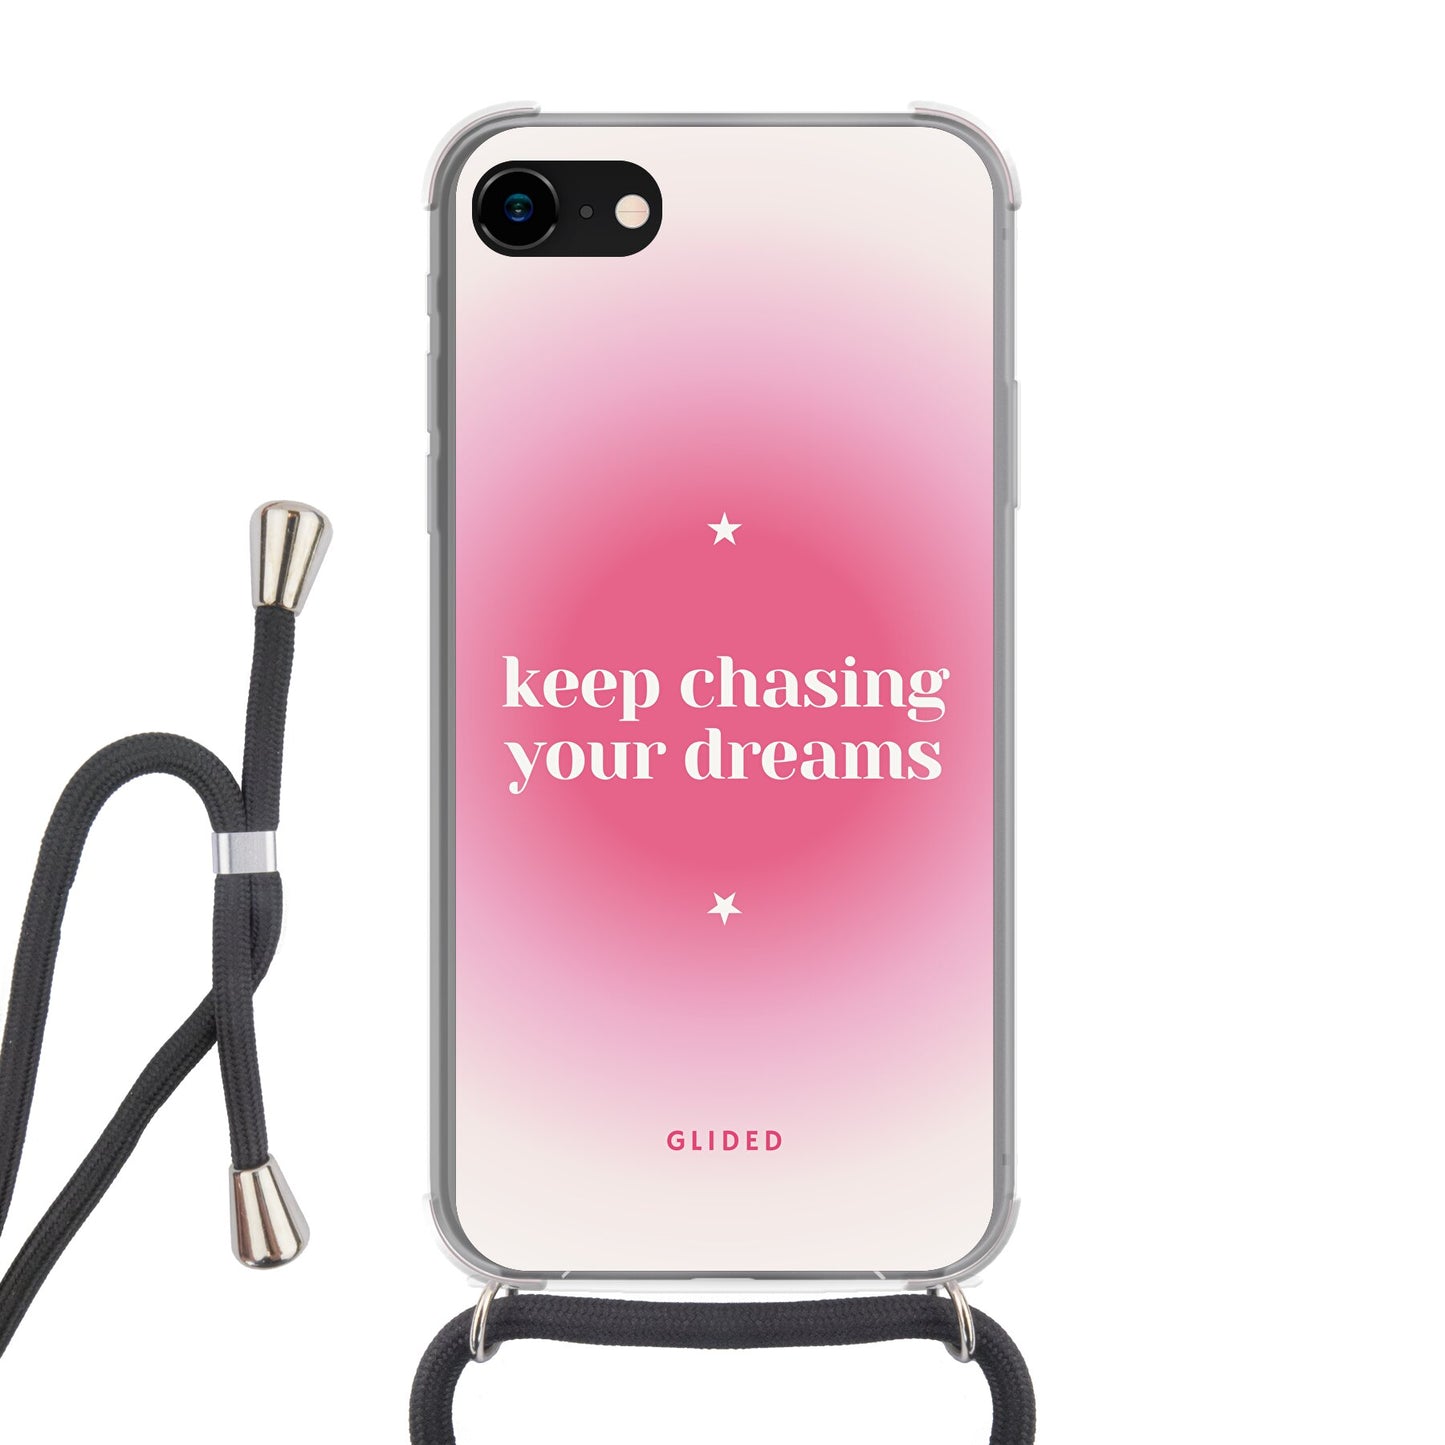 Chasing Dreams - iPhone 7 Handyhülle Crossbody case mit Band